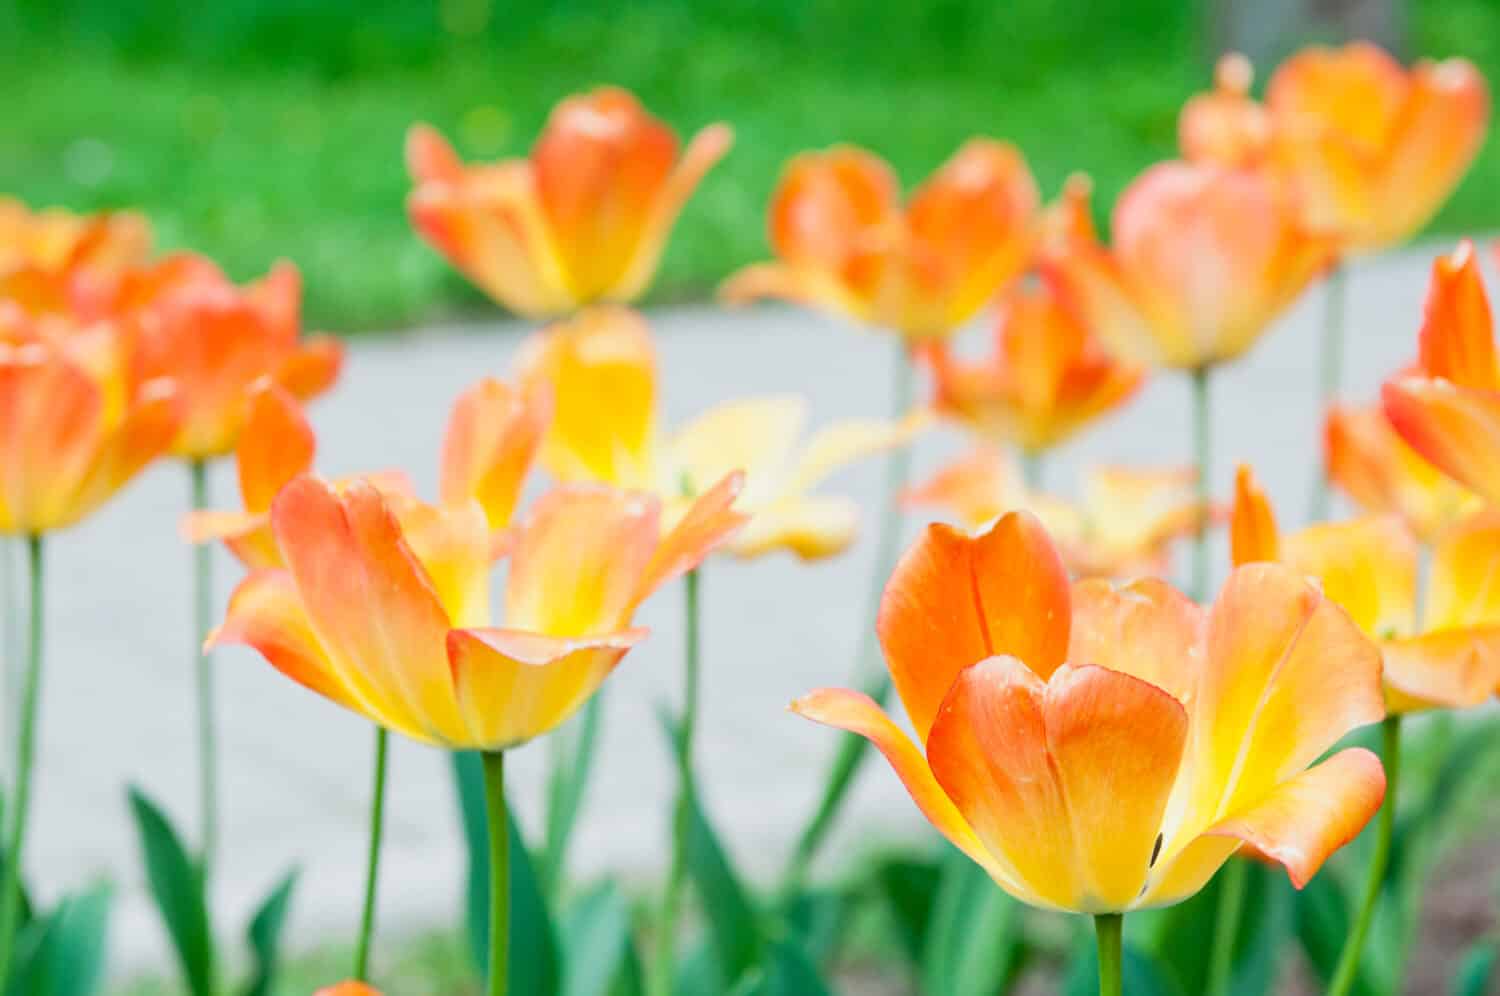 A many early Tulip Hybrids – Daydream, has yellow petals that change to orange at fringed edges. Blooming yellow and orange tulips on blurred background. Beautiful flowers as floral natural backdrop.